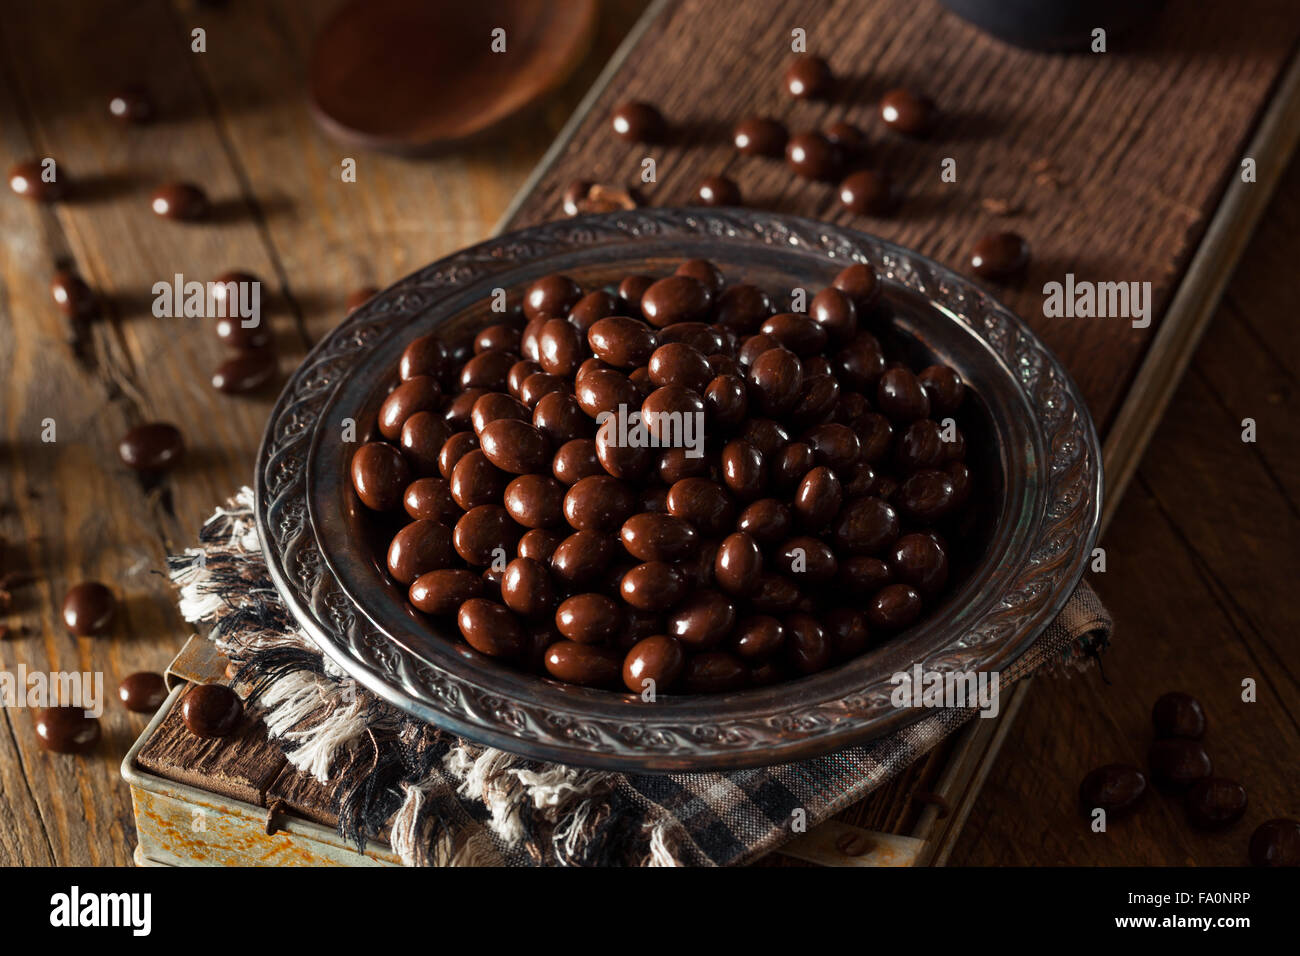 Chocolate Covered Espresso Coffee Beans Ready to Eat Stock Photo